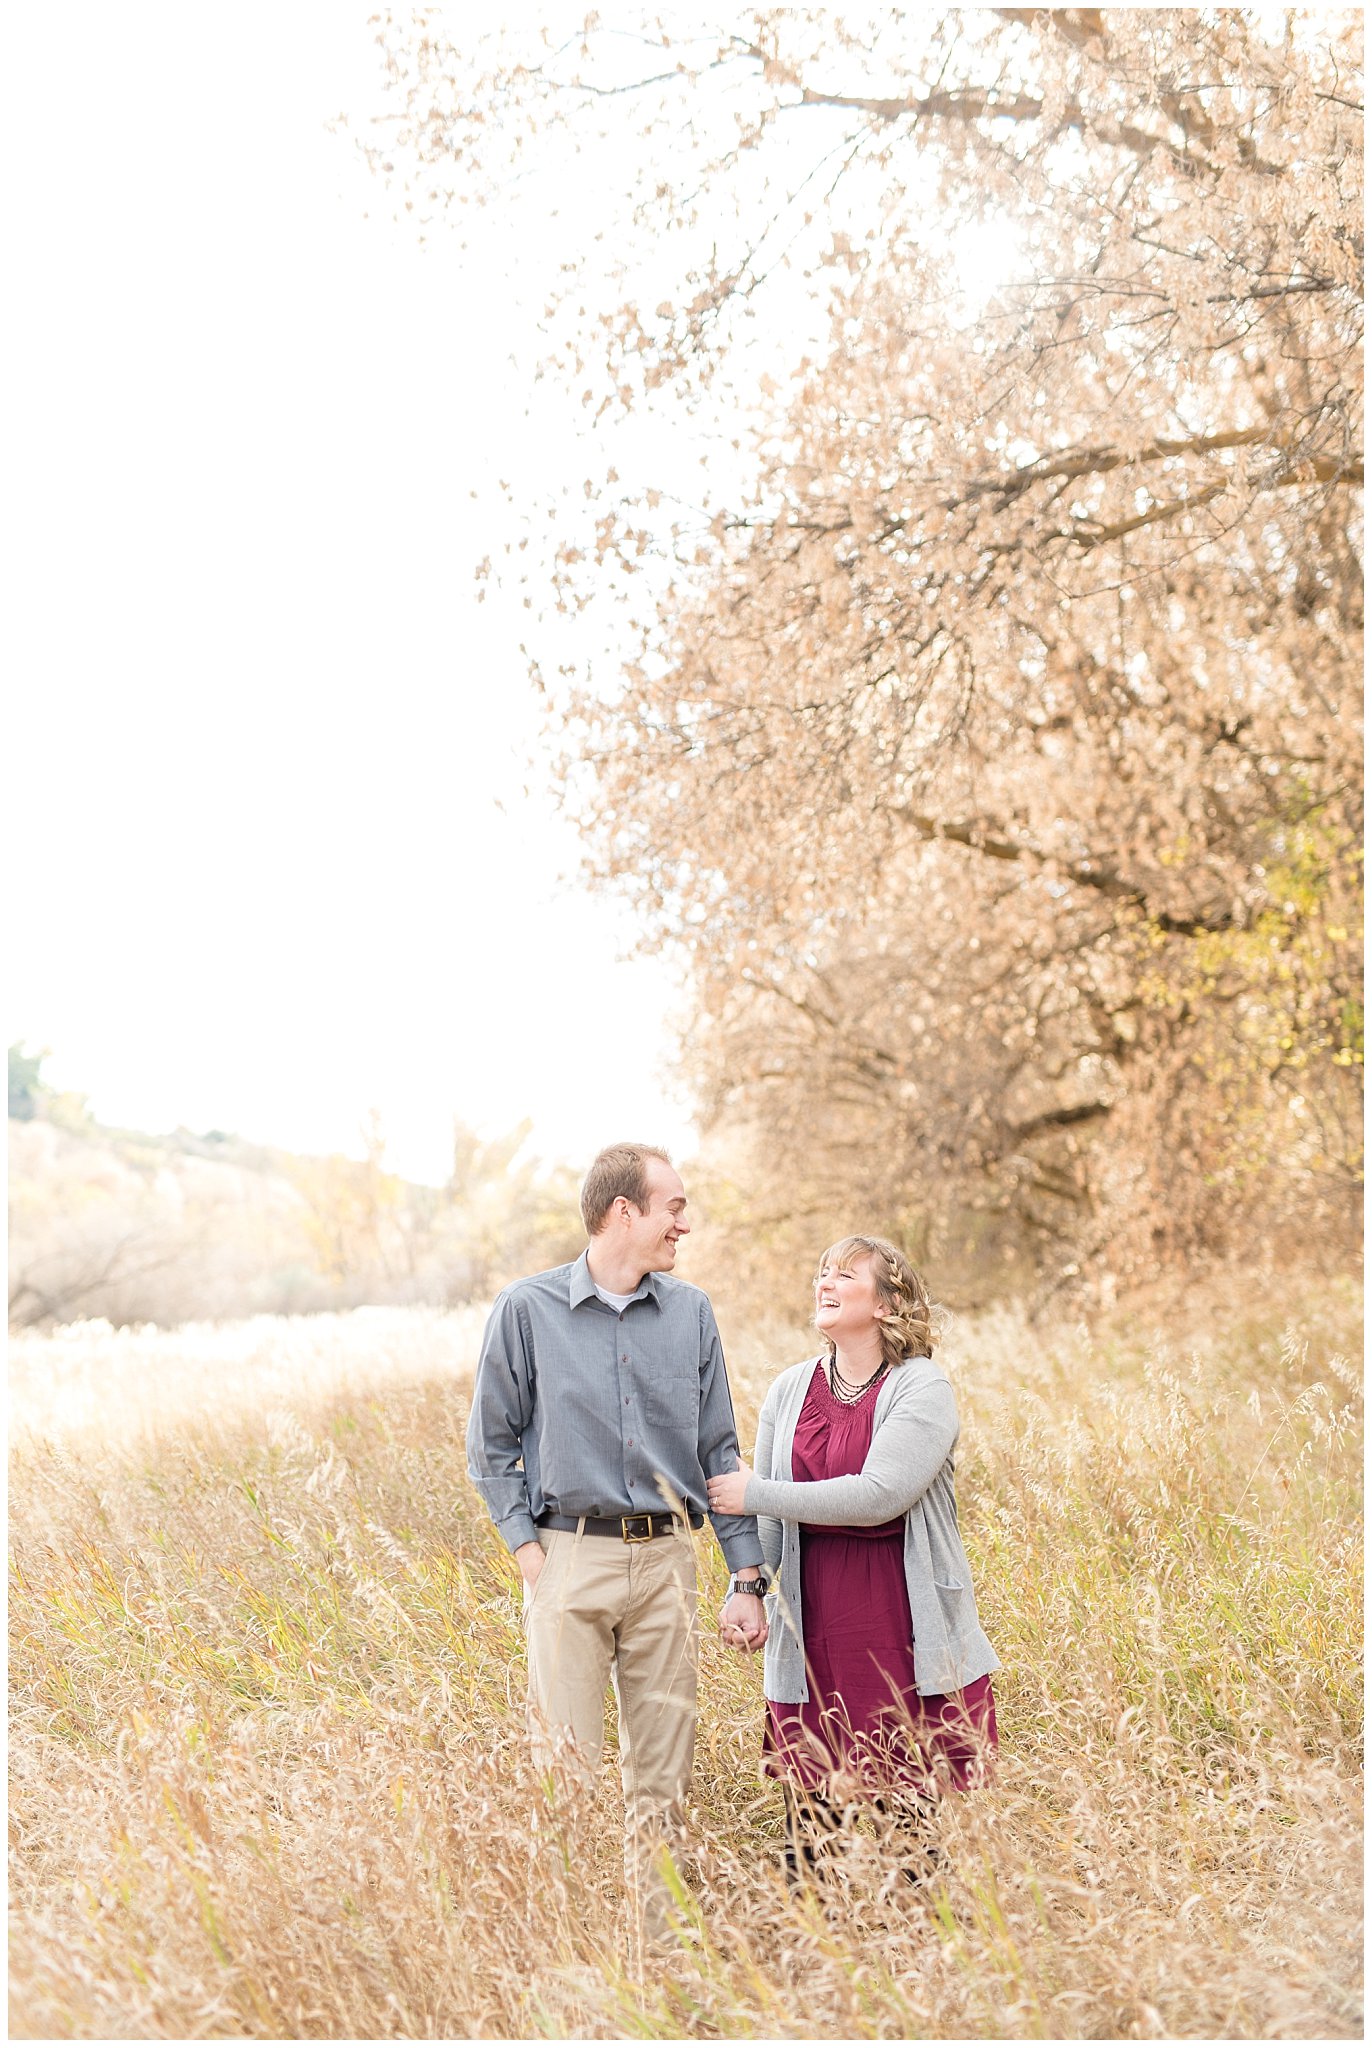 Couple walking and laughing during field engagement | Davis County Fall Engagement | Utah Wedding Photographers | Jessie and Dallin